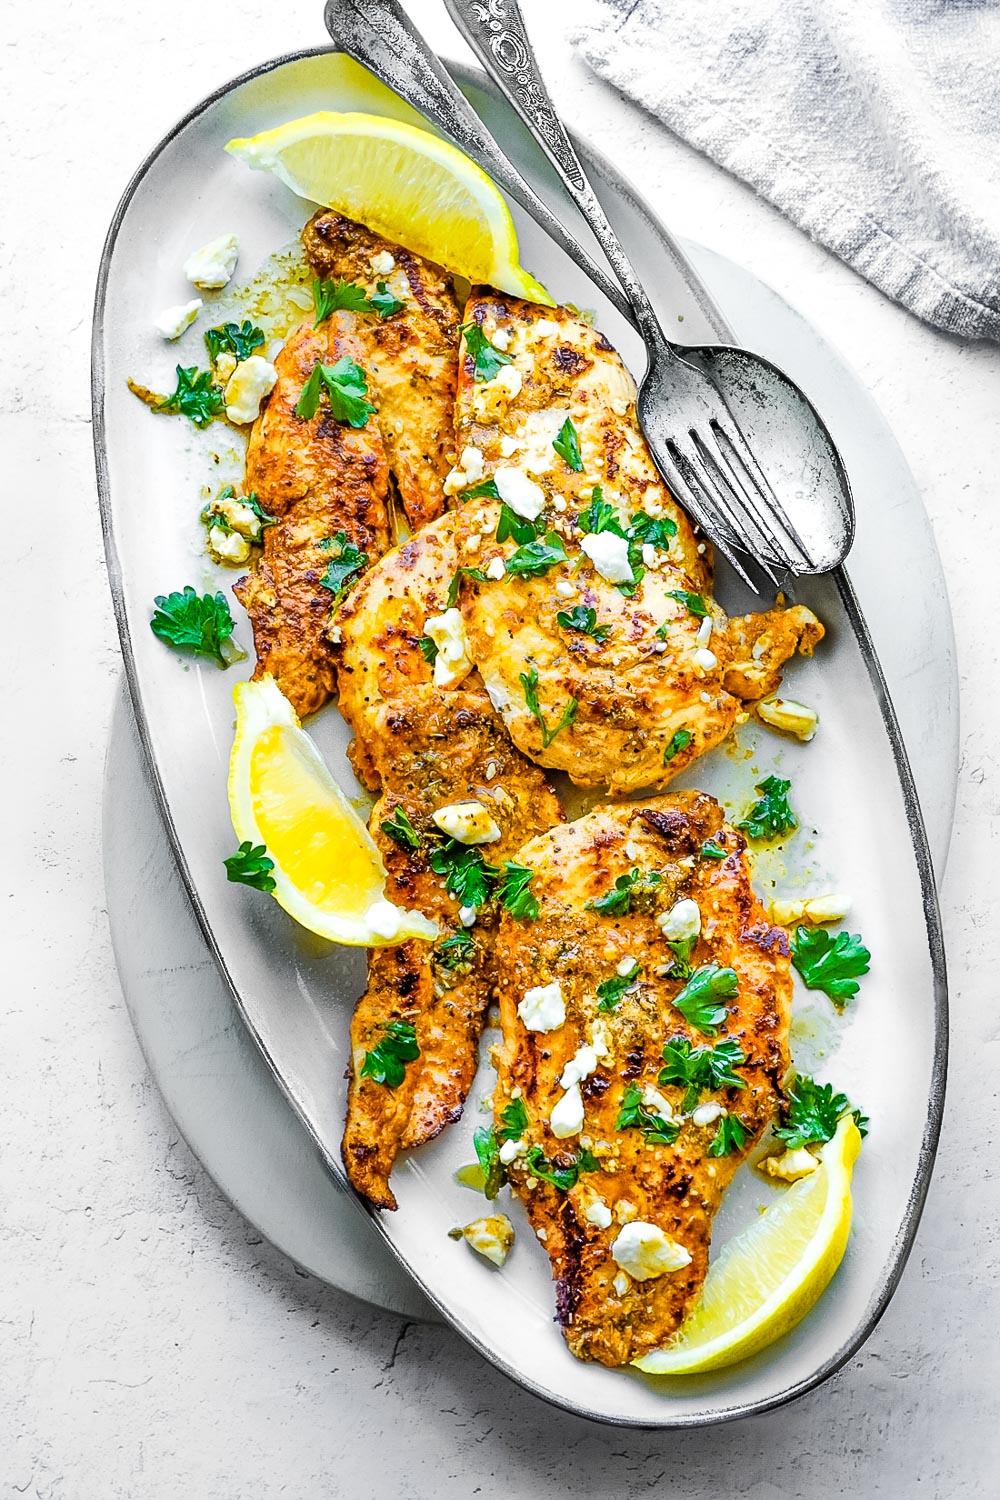 A platter of Greek Lemon Chicken with lemon wedges, feta cheese, and parsley.